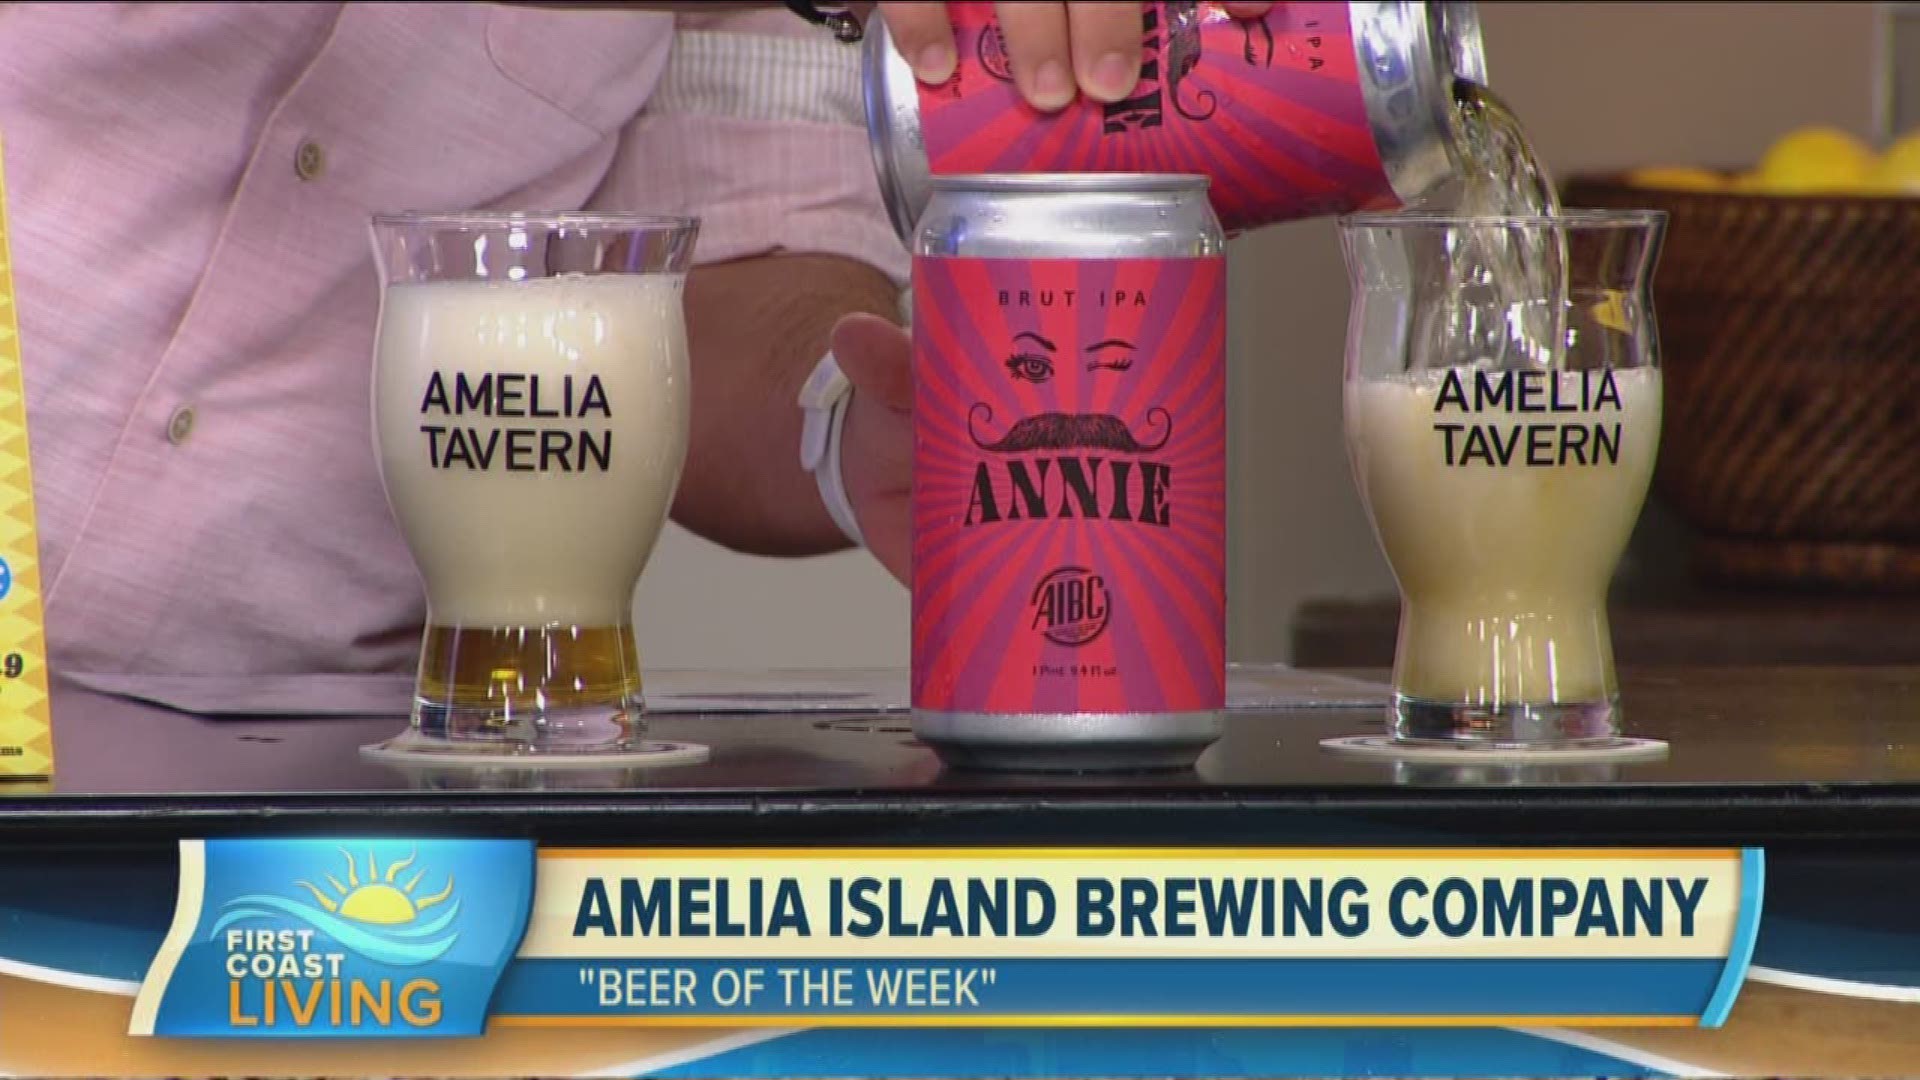 Amelia Tavern is a local destination for great food, cold brews and refreshing service.